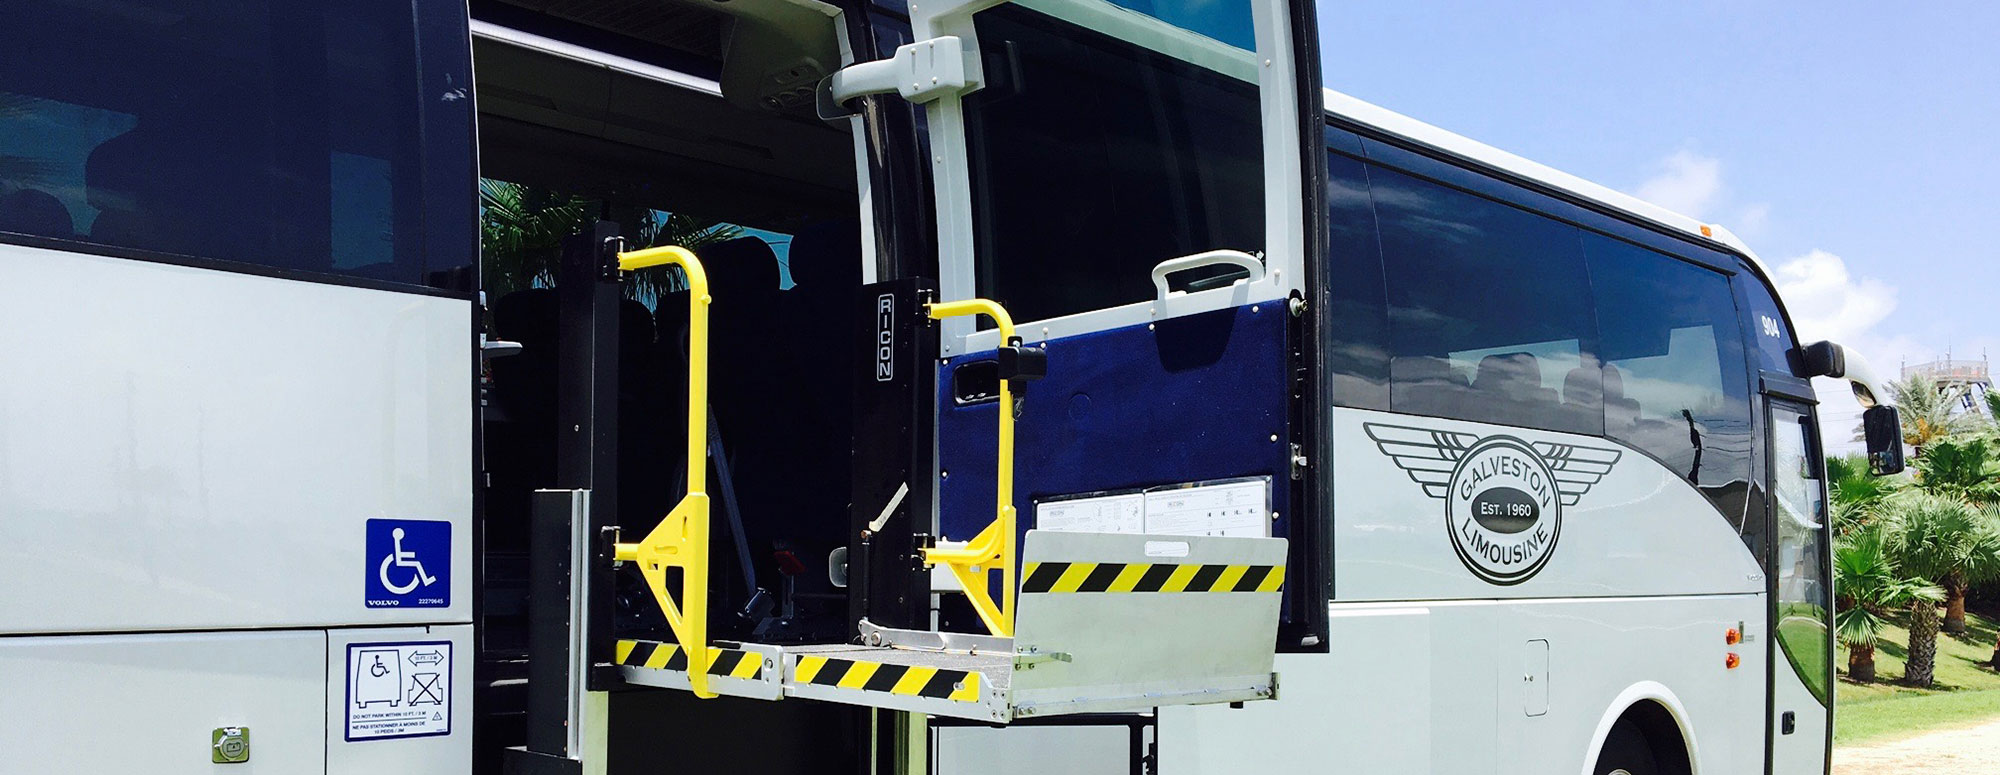 Bus with Wheelchair Access